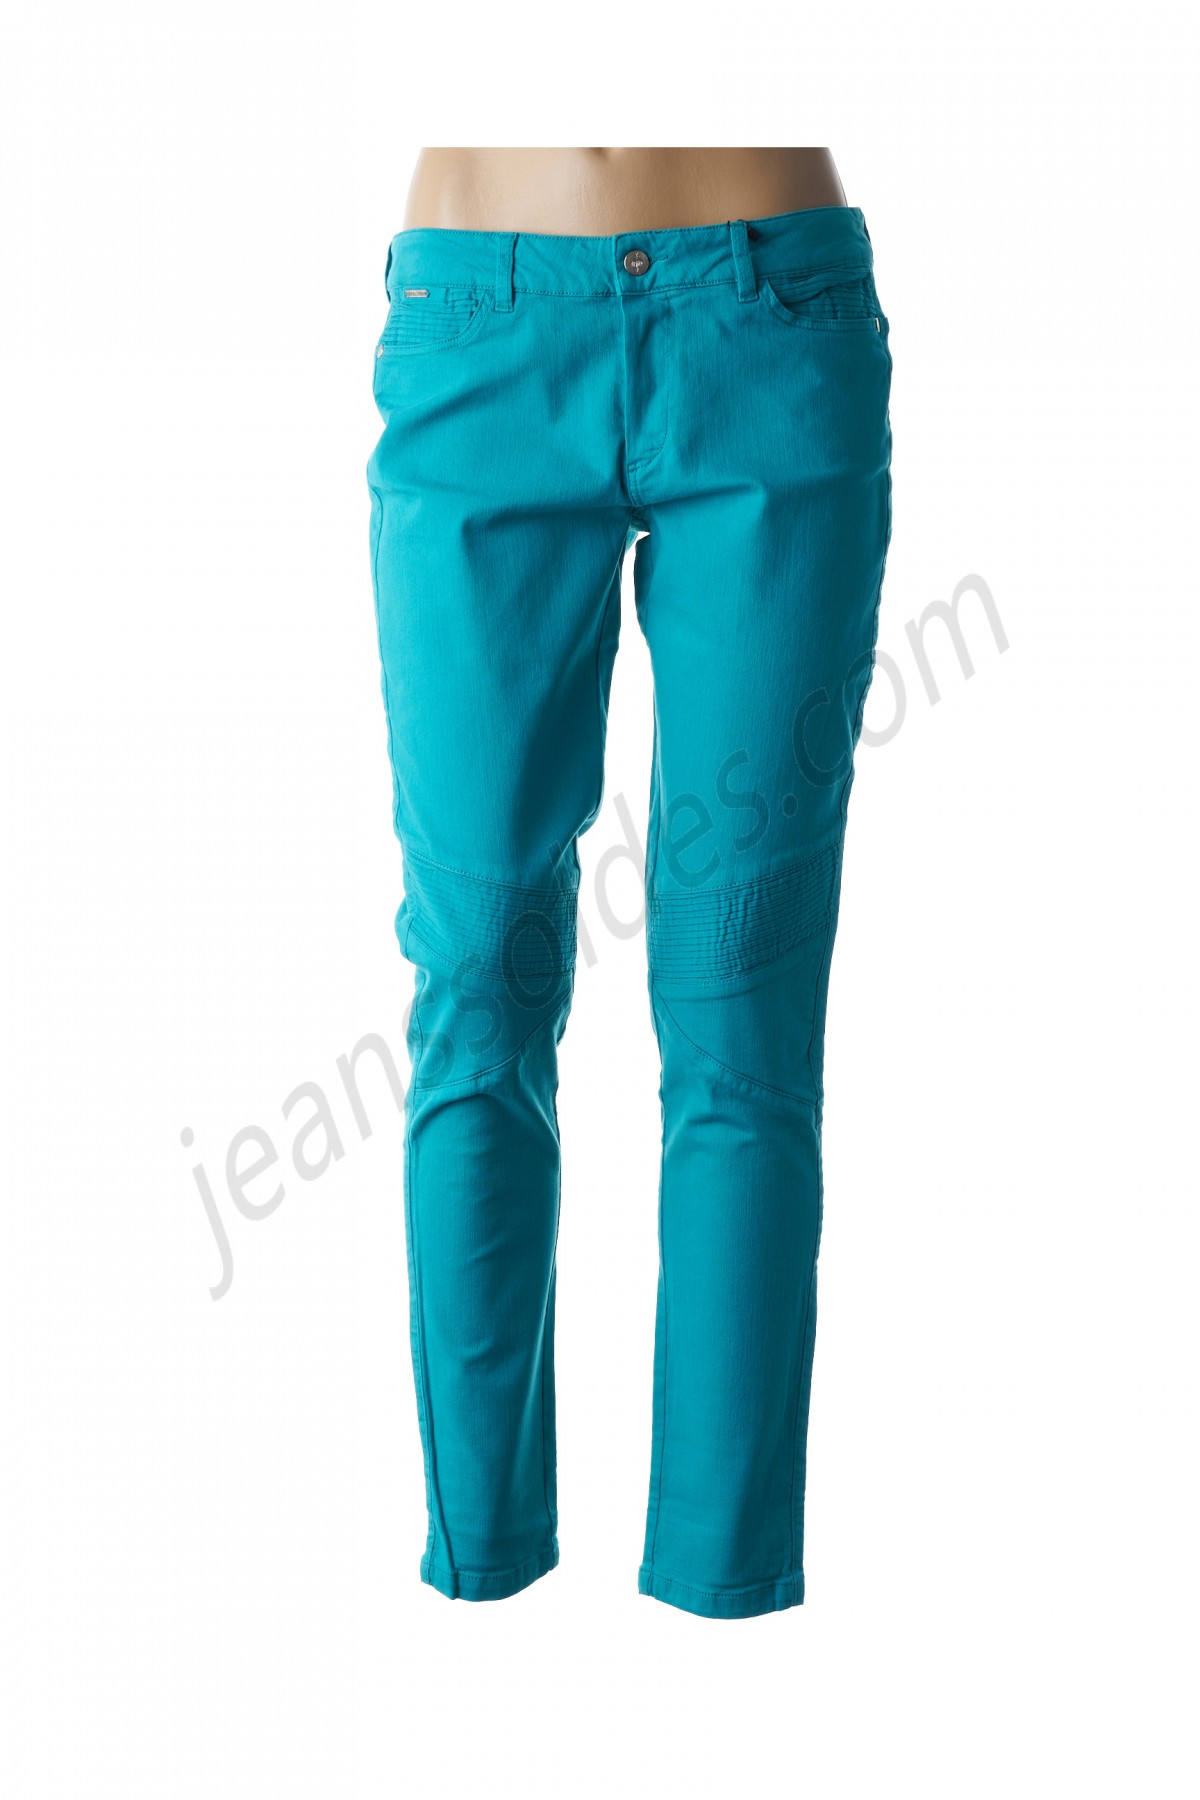 one step-Jeans coupe slim prix d’amis - -0